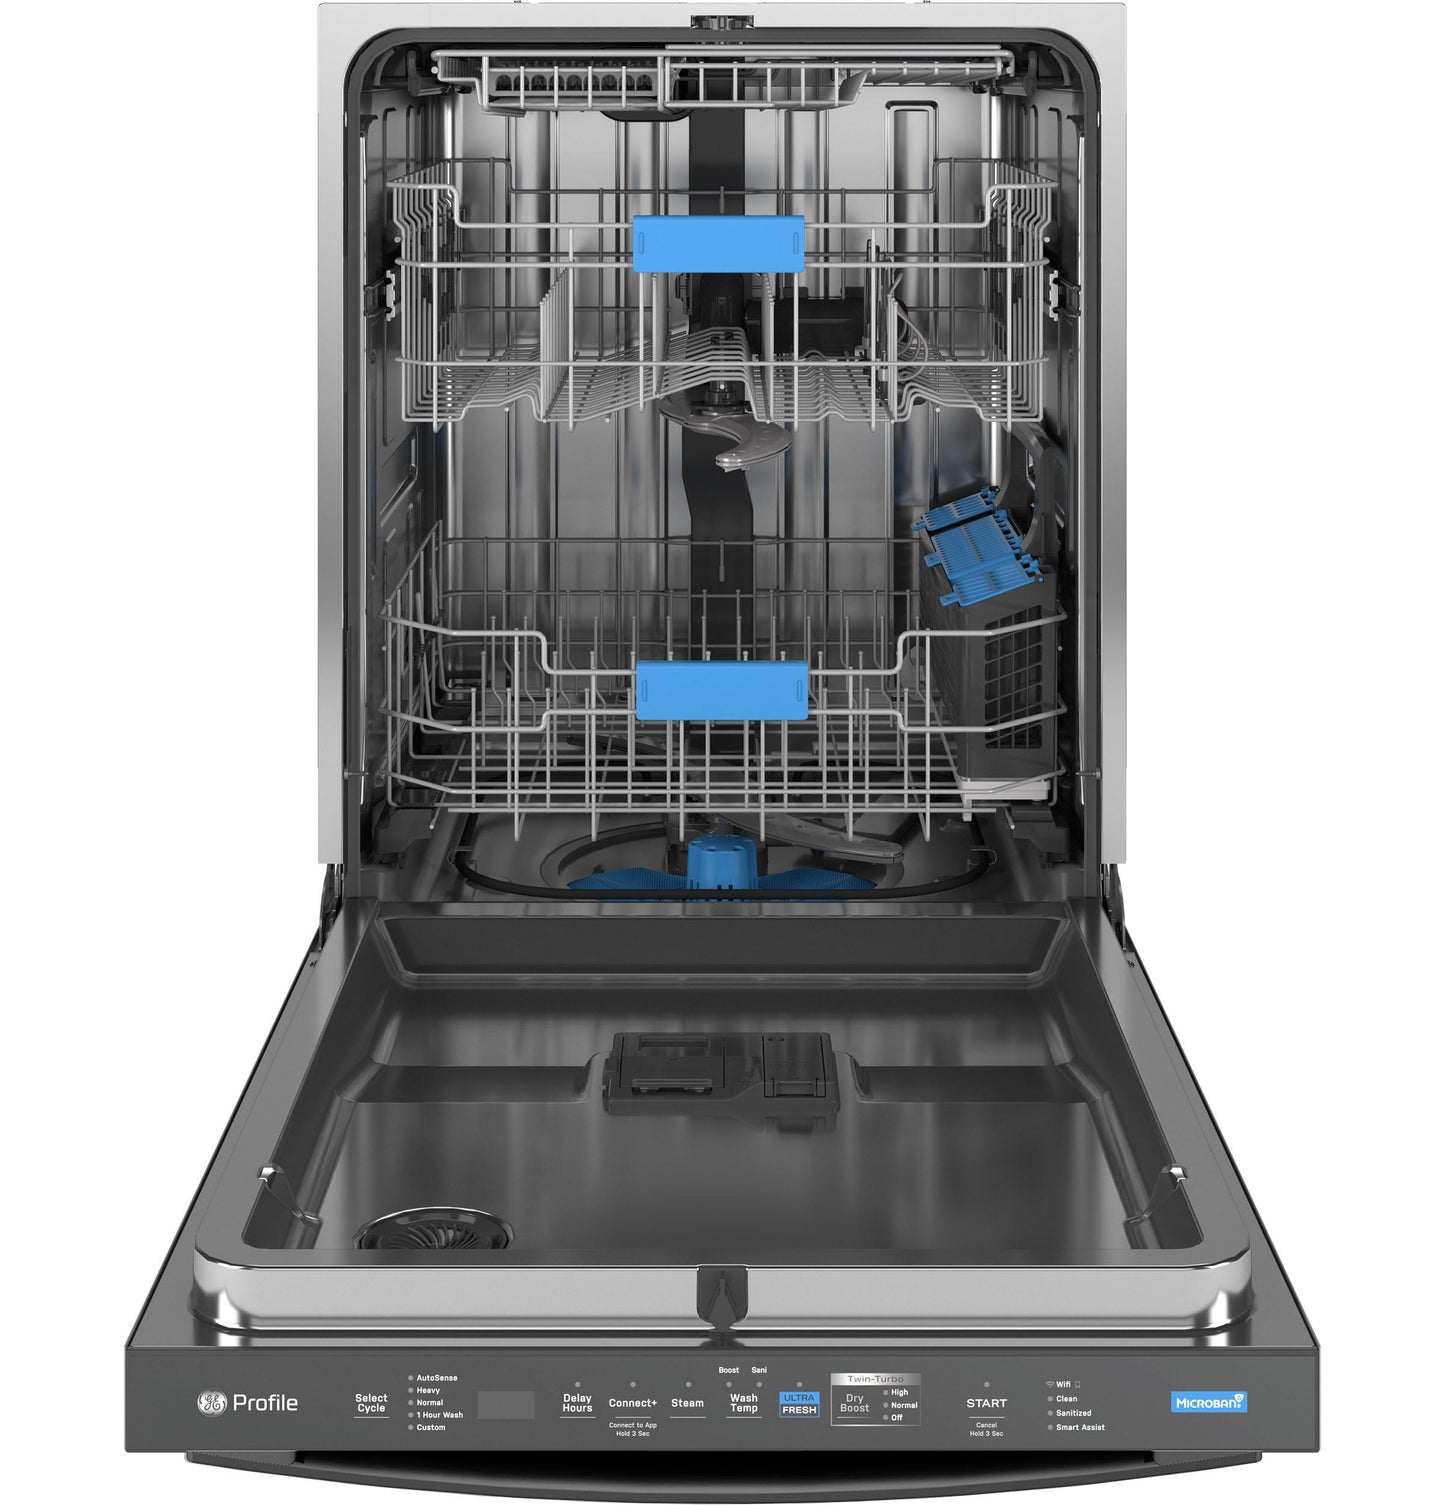 Ge Appliances PDT755SBVTS Ge Profile&#8482; Energy Star Smart Ultrafresh System Dishwasher With Microban&#8482; Antimicrobial Technology With Deep Clean Washing 3Rd Rack, 42 Dba